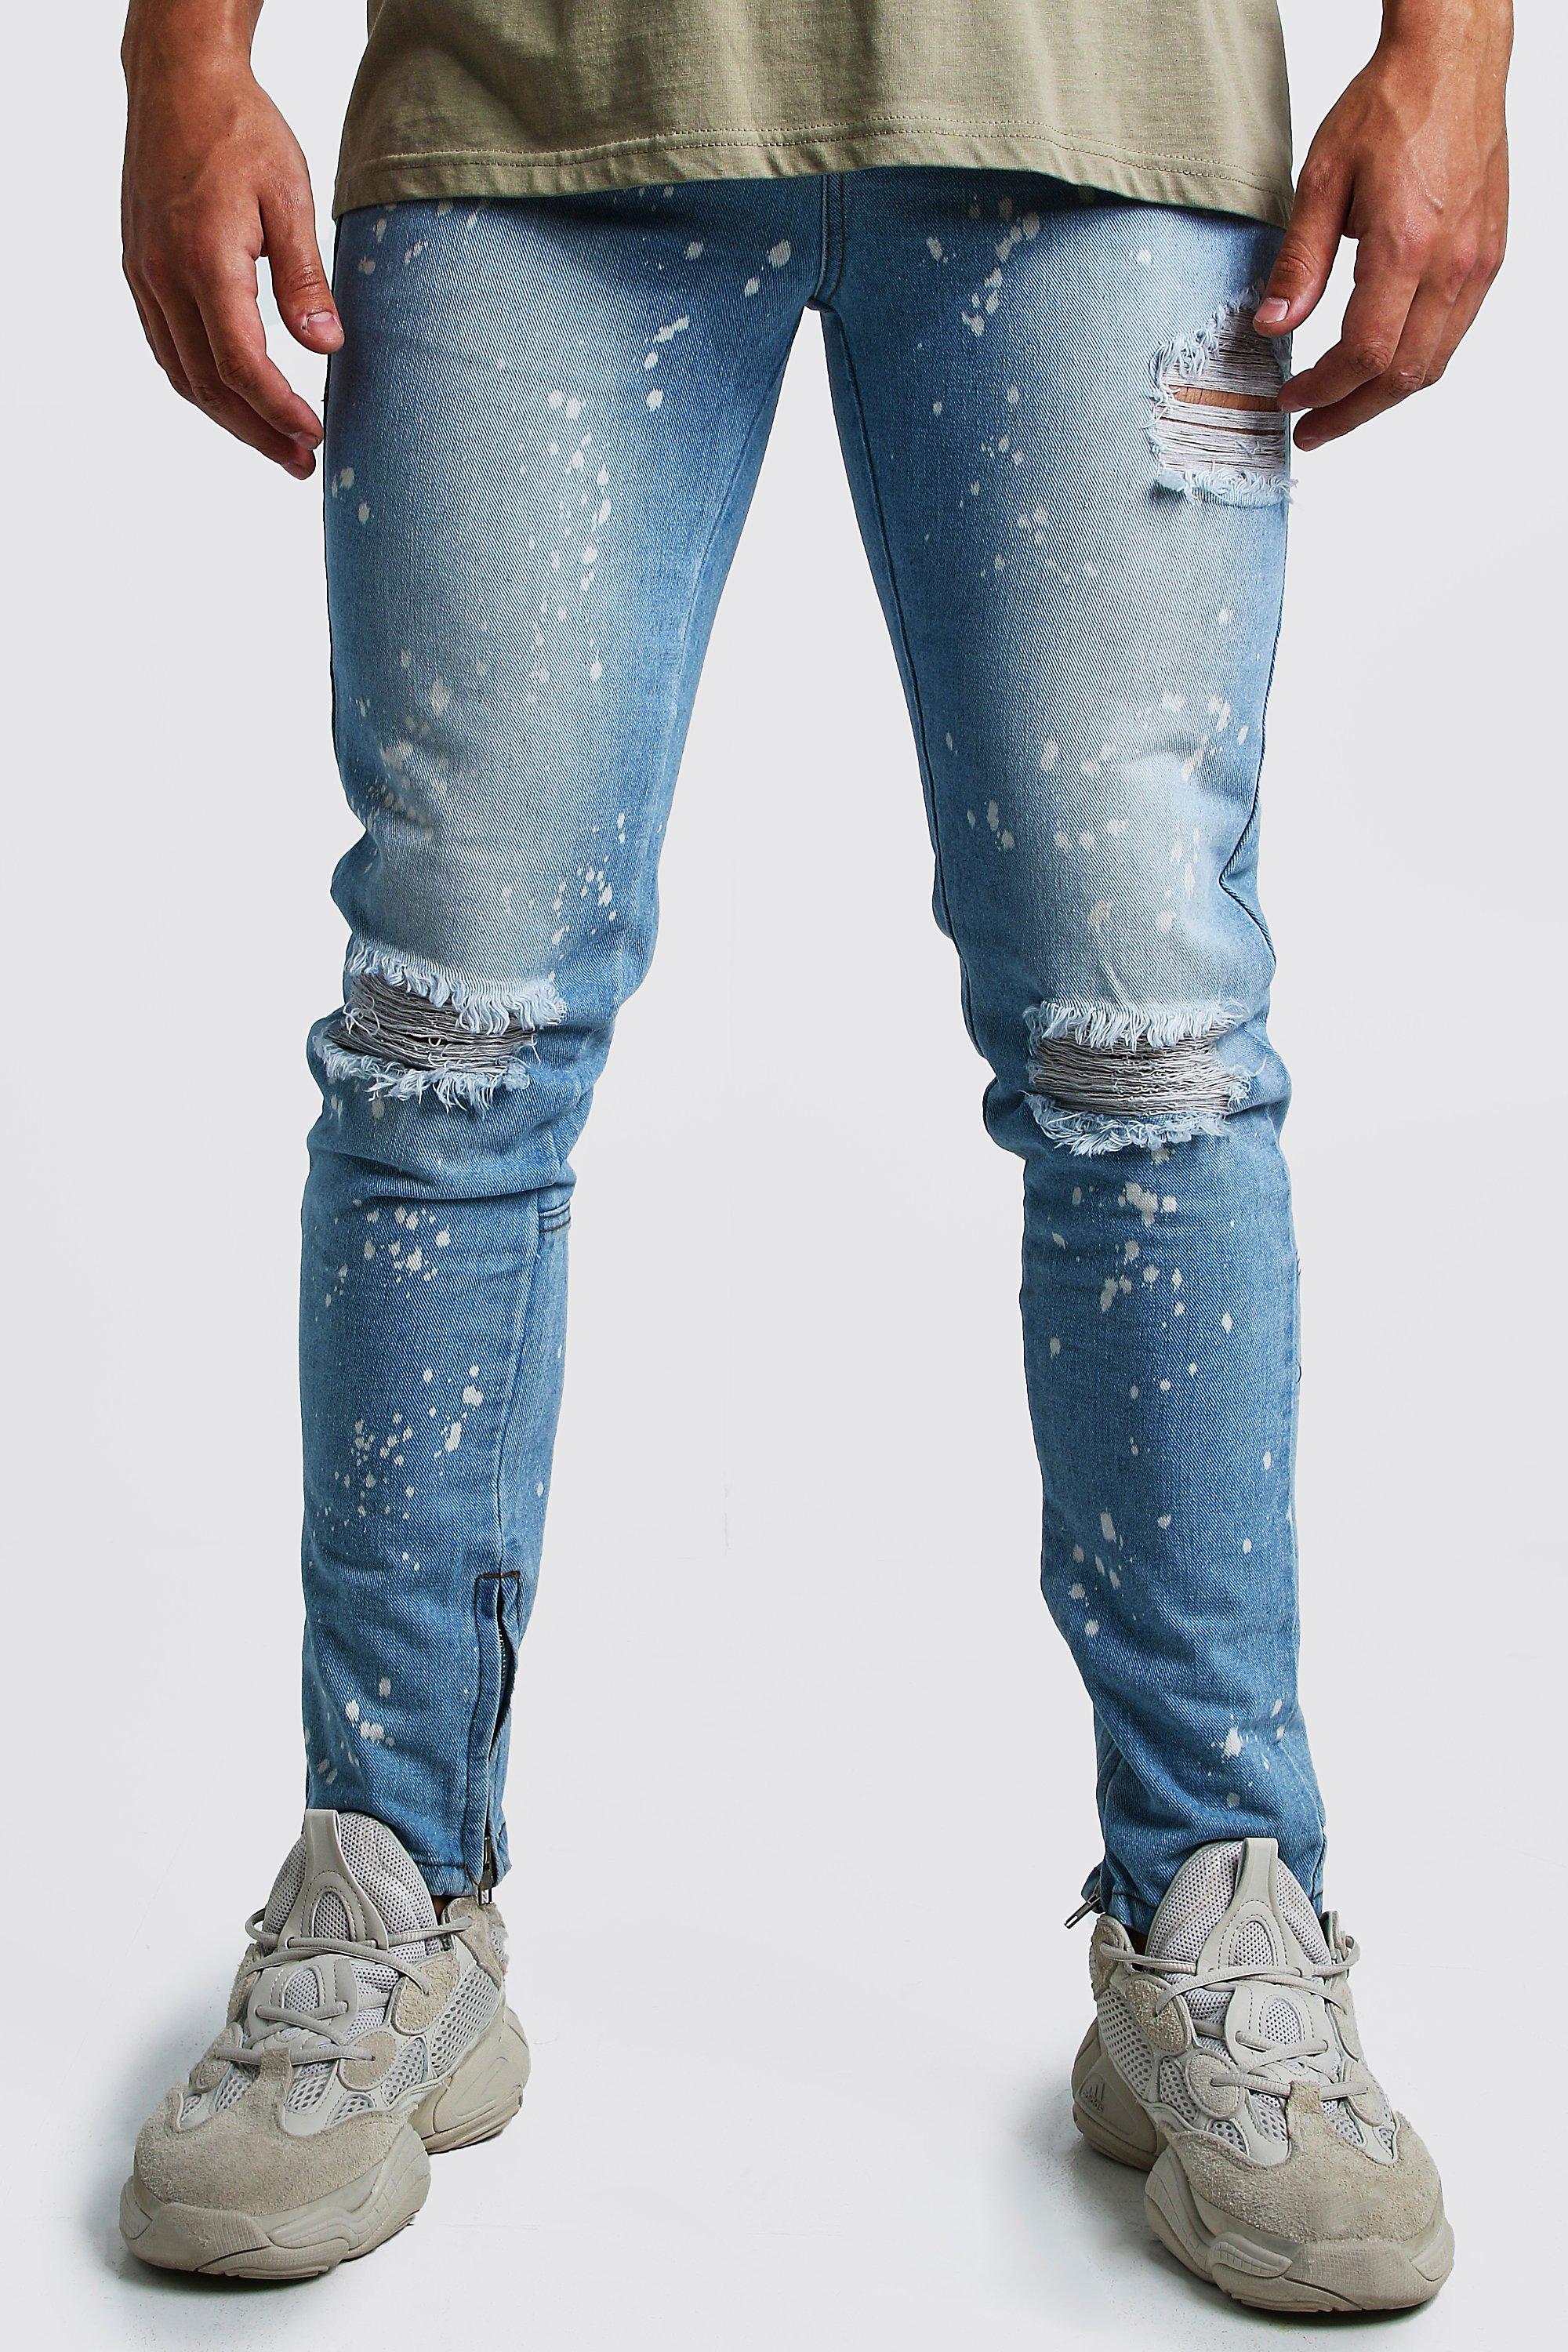 ripped knee jeans